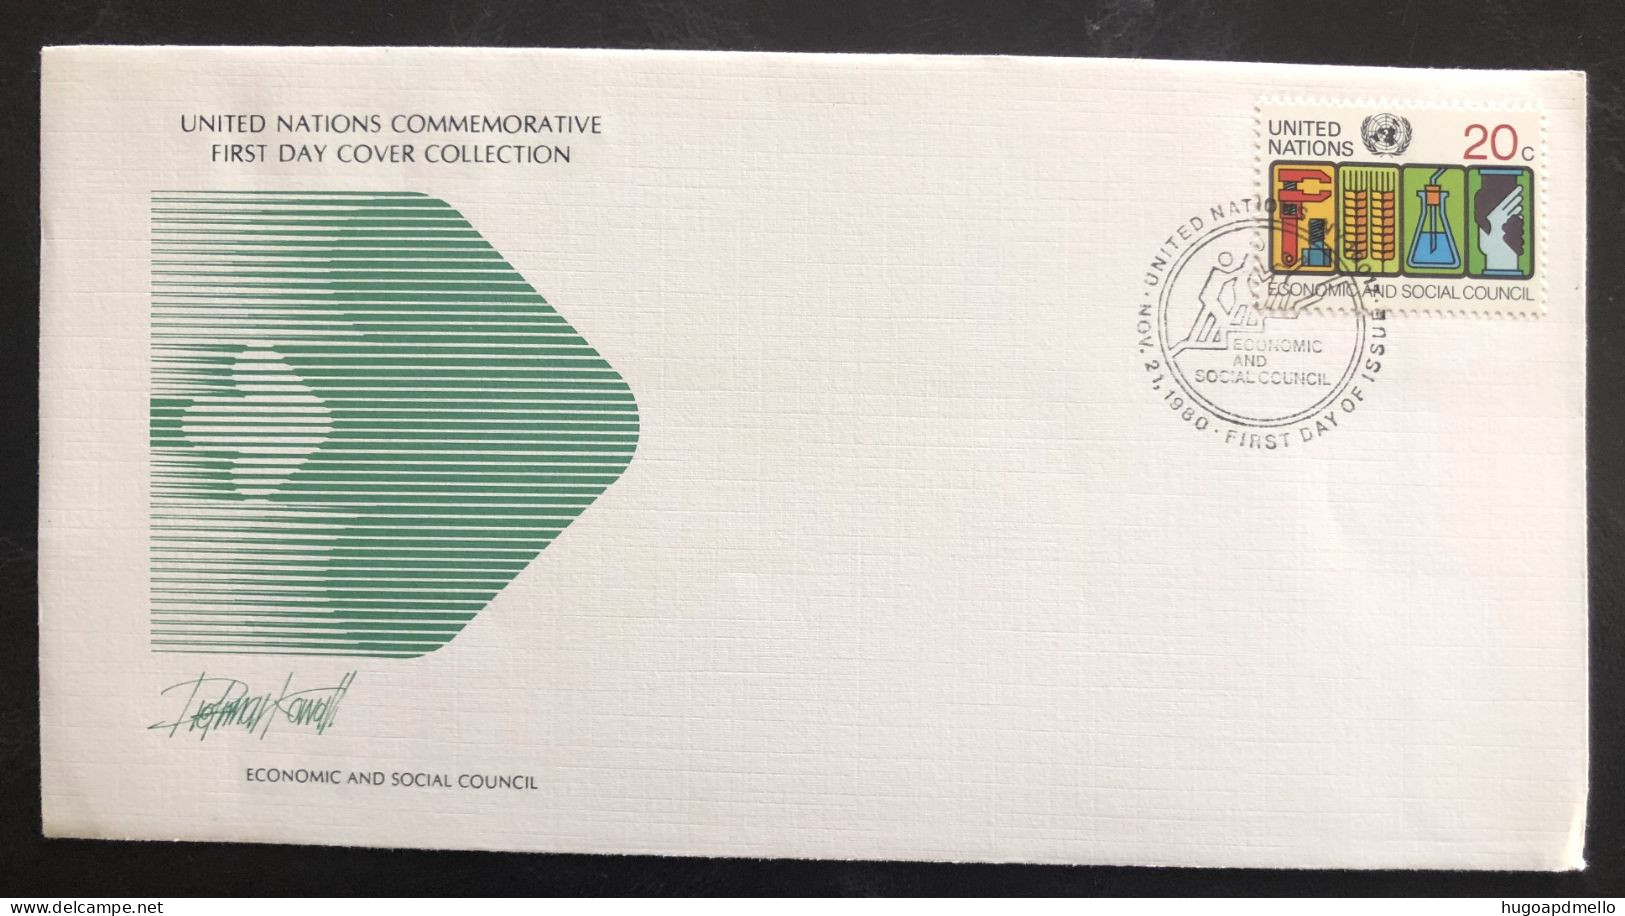 UNITED NATIONS, Uncirculated FDC « ECONOMIN AND SOCIAL COUNCIL », 1980 - UNO